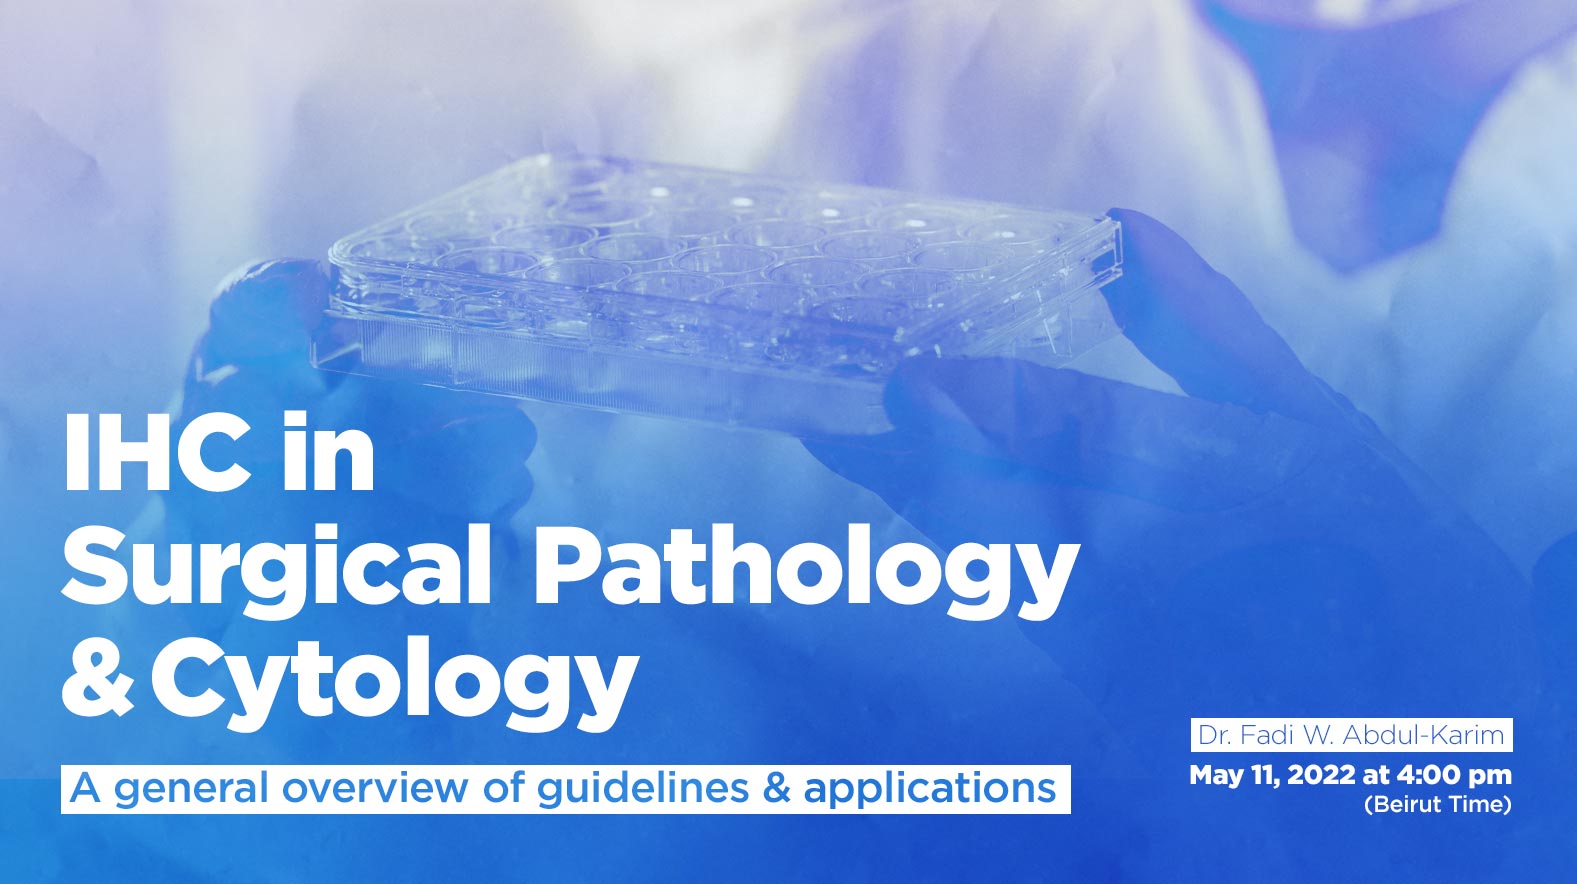 IHC in Surgical Pathology and Cytology